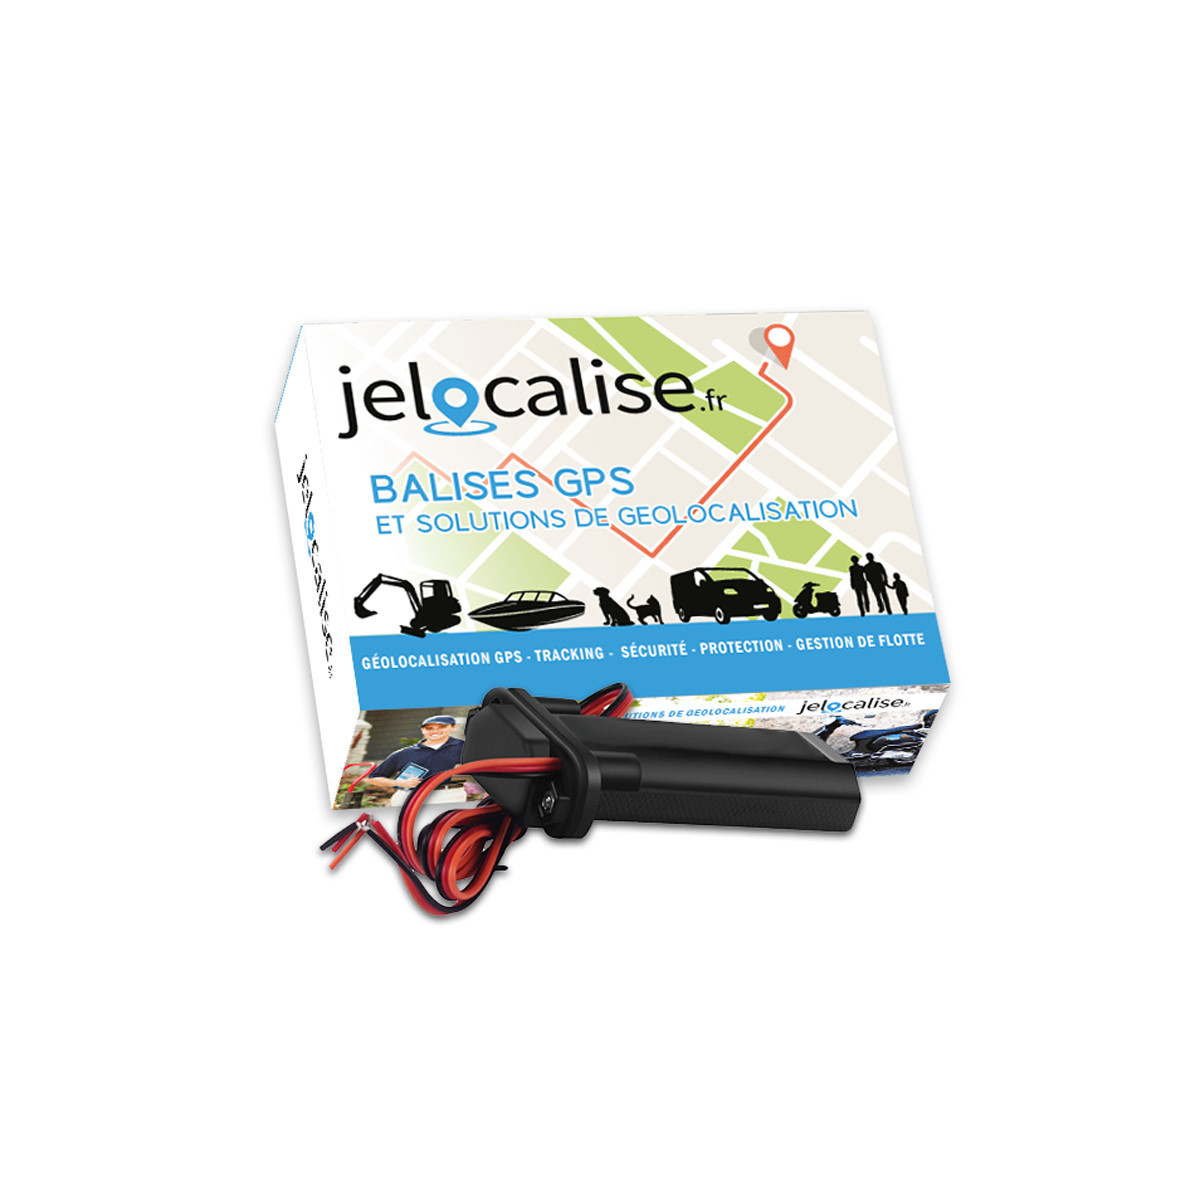 Balise GPS Easy Tracker pour localiser des voitures motos camions